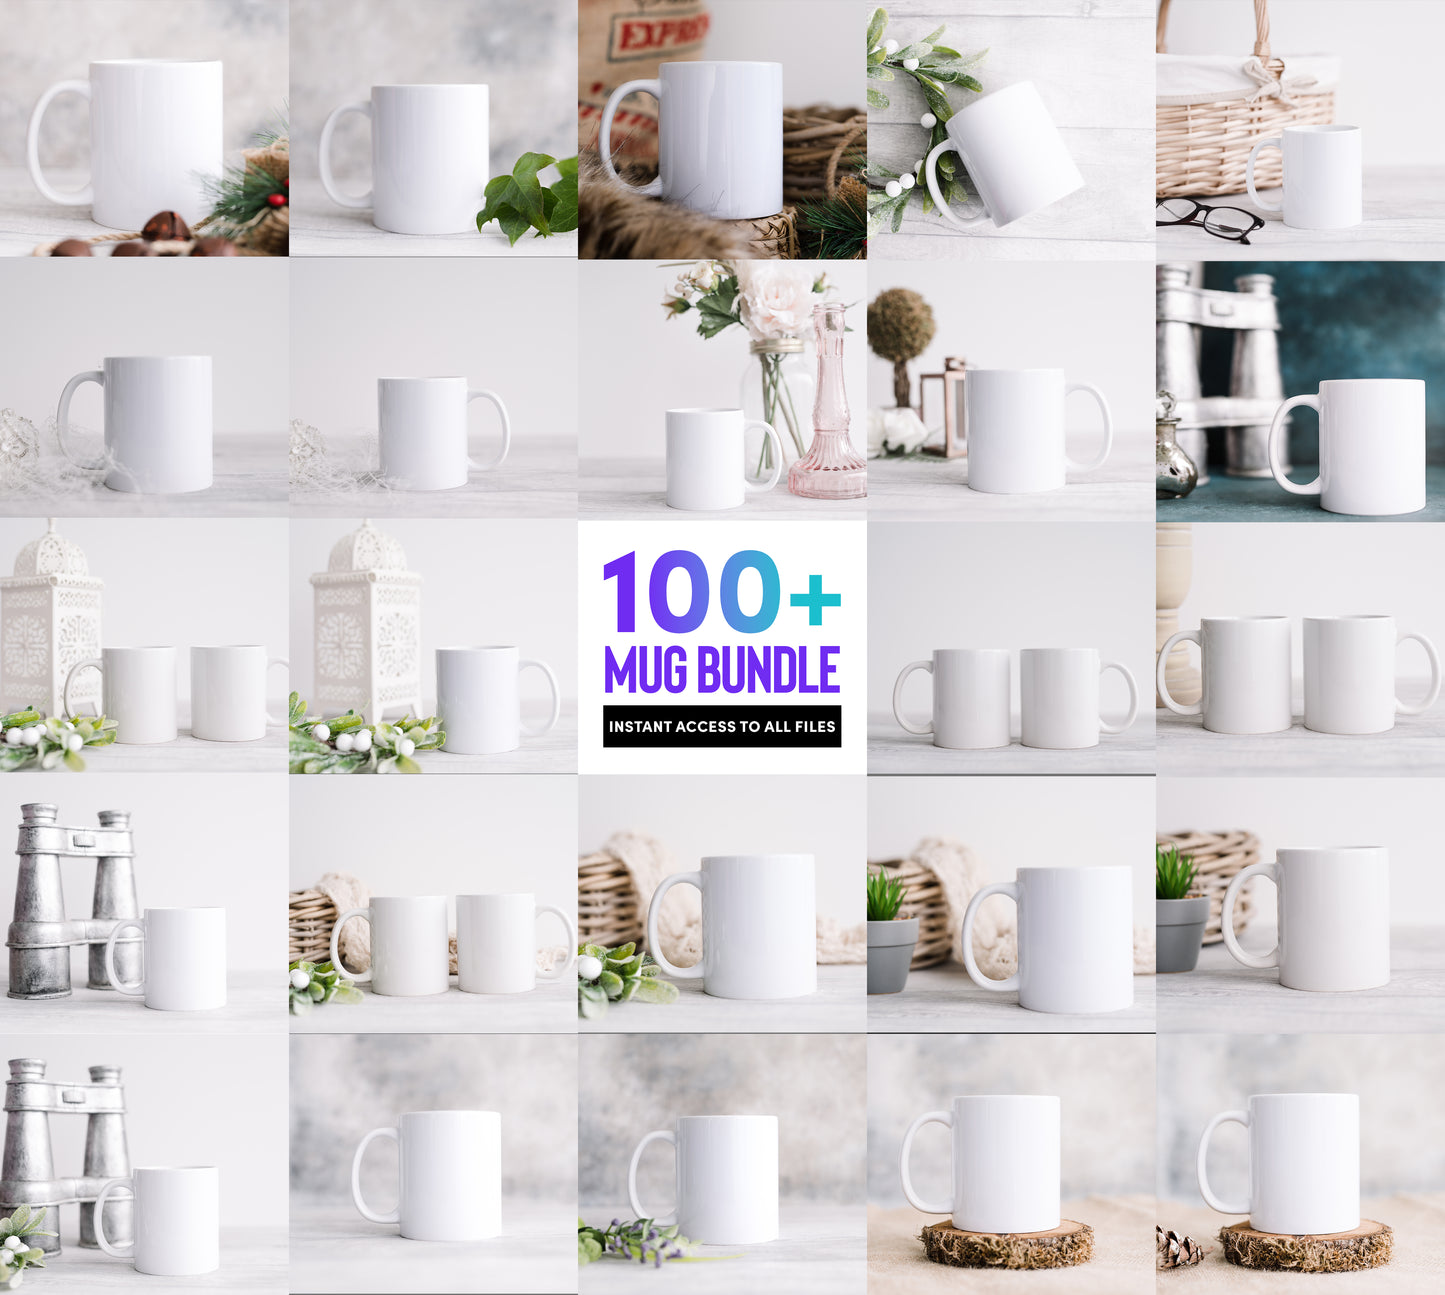 200+ Entire Shop Mockup Bundle, Tumblers, Clear Glass Can, Video Mockups, 40 Oz Tumbler Mockups, Mugs mockups, Tote Bags and more